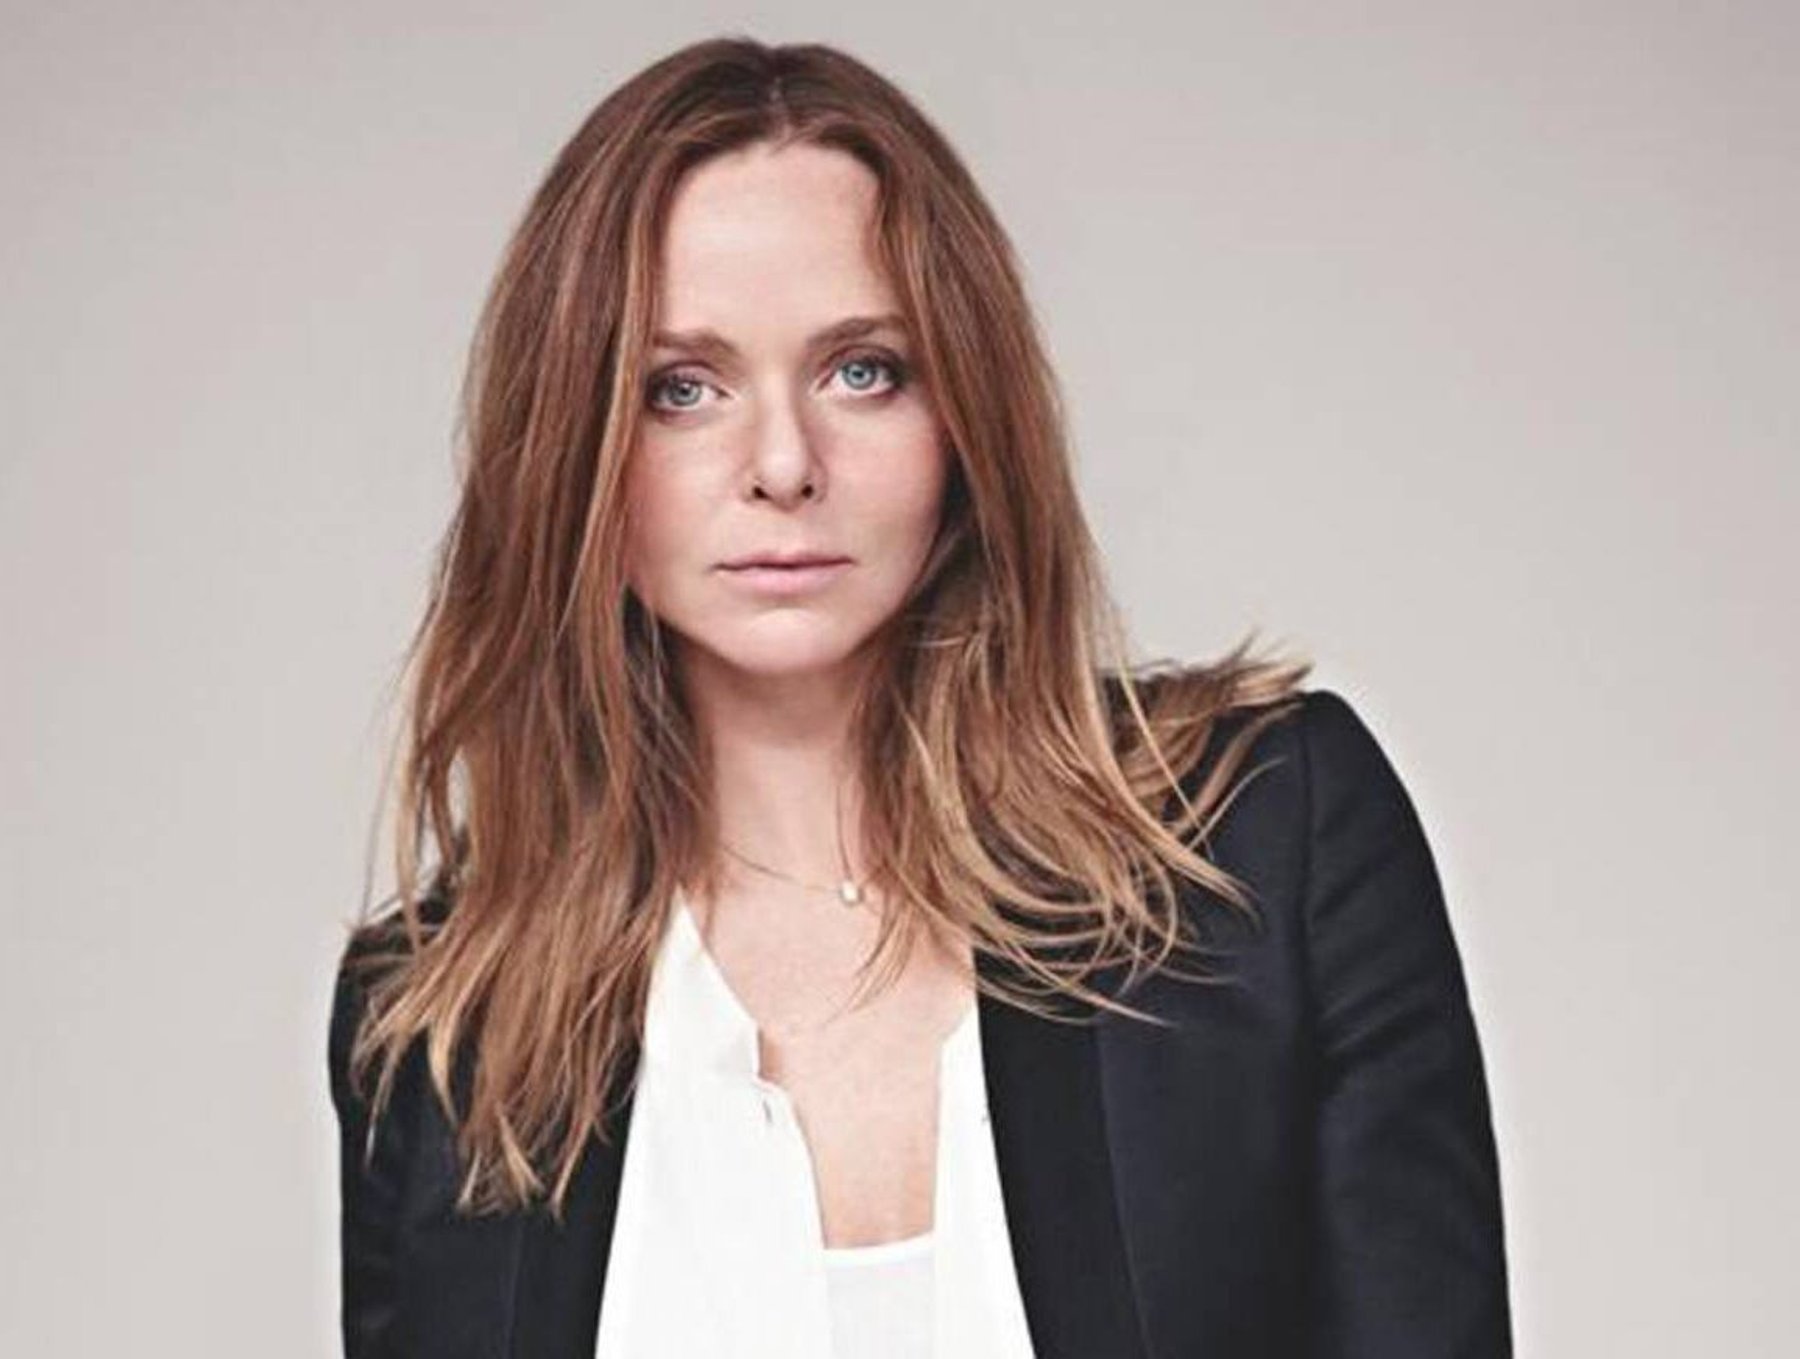 Stella McCartney Effortlessly Blends Style and Sustainability